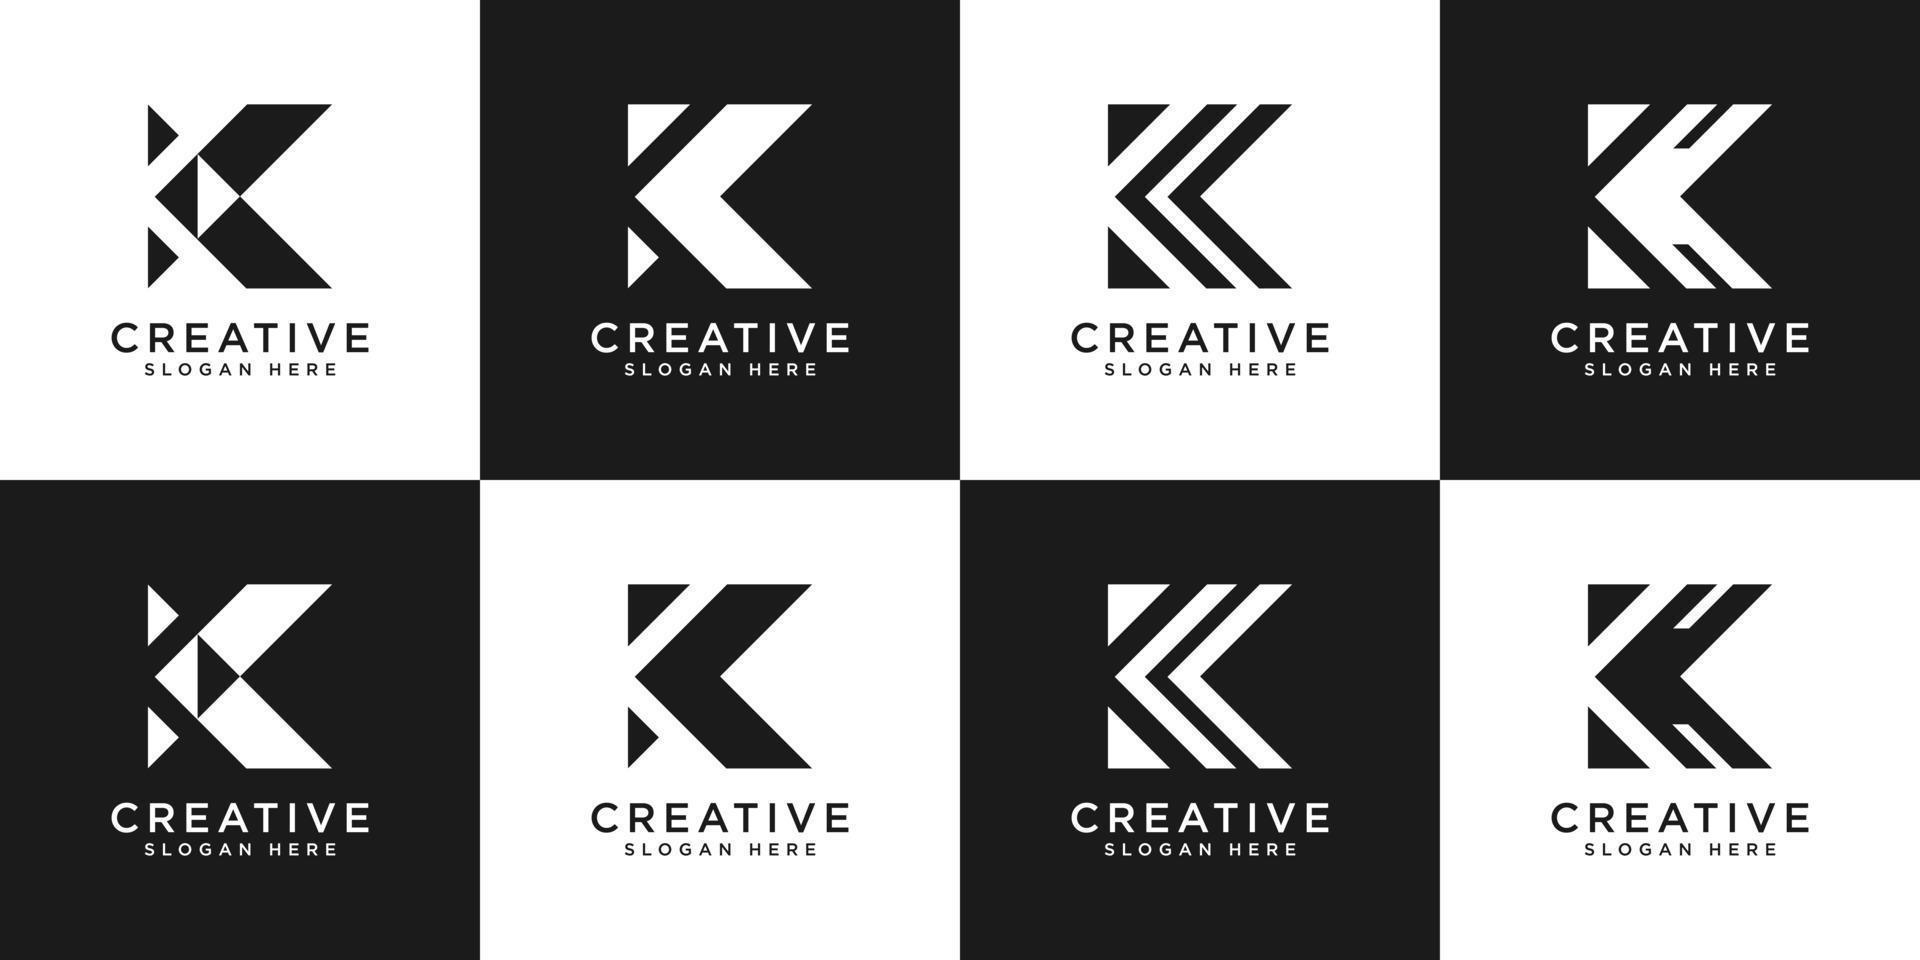 set of initials letter K abstract logo vector design